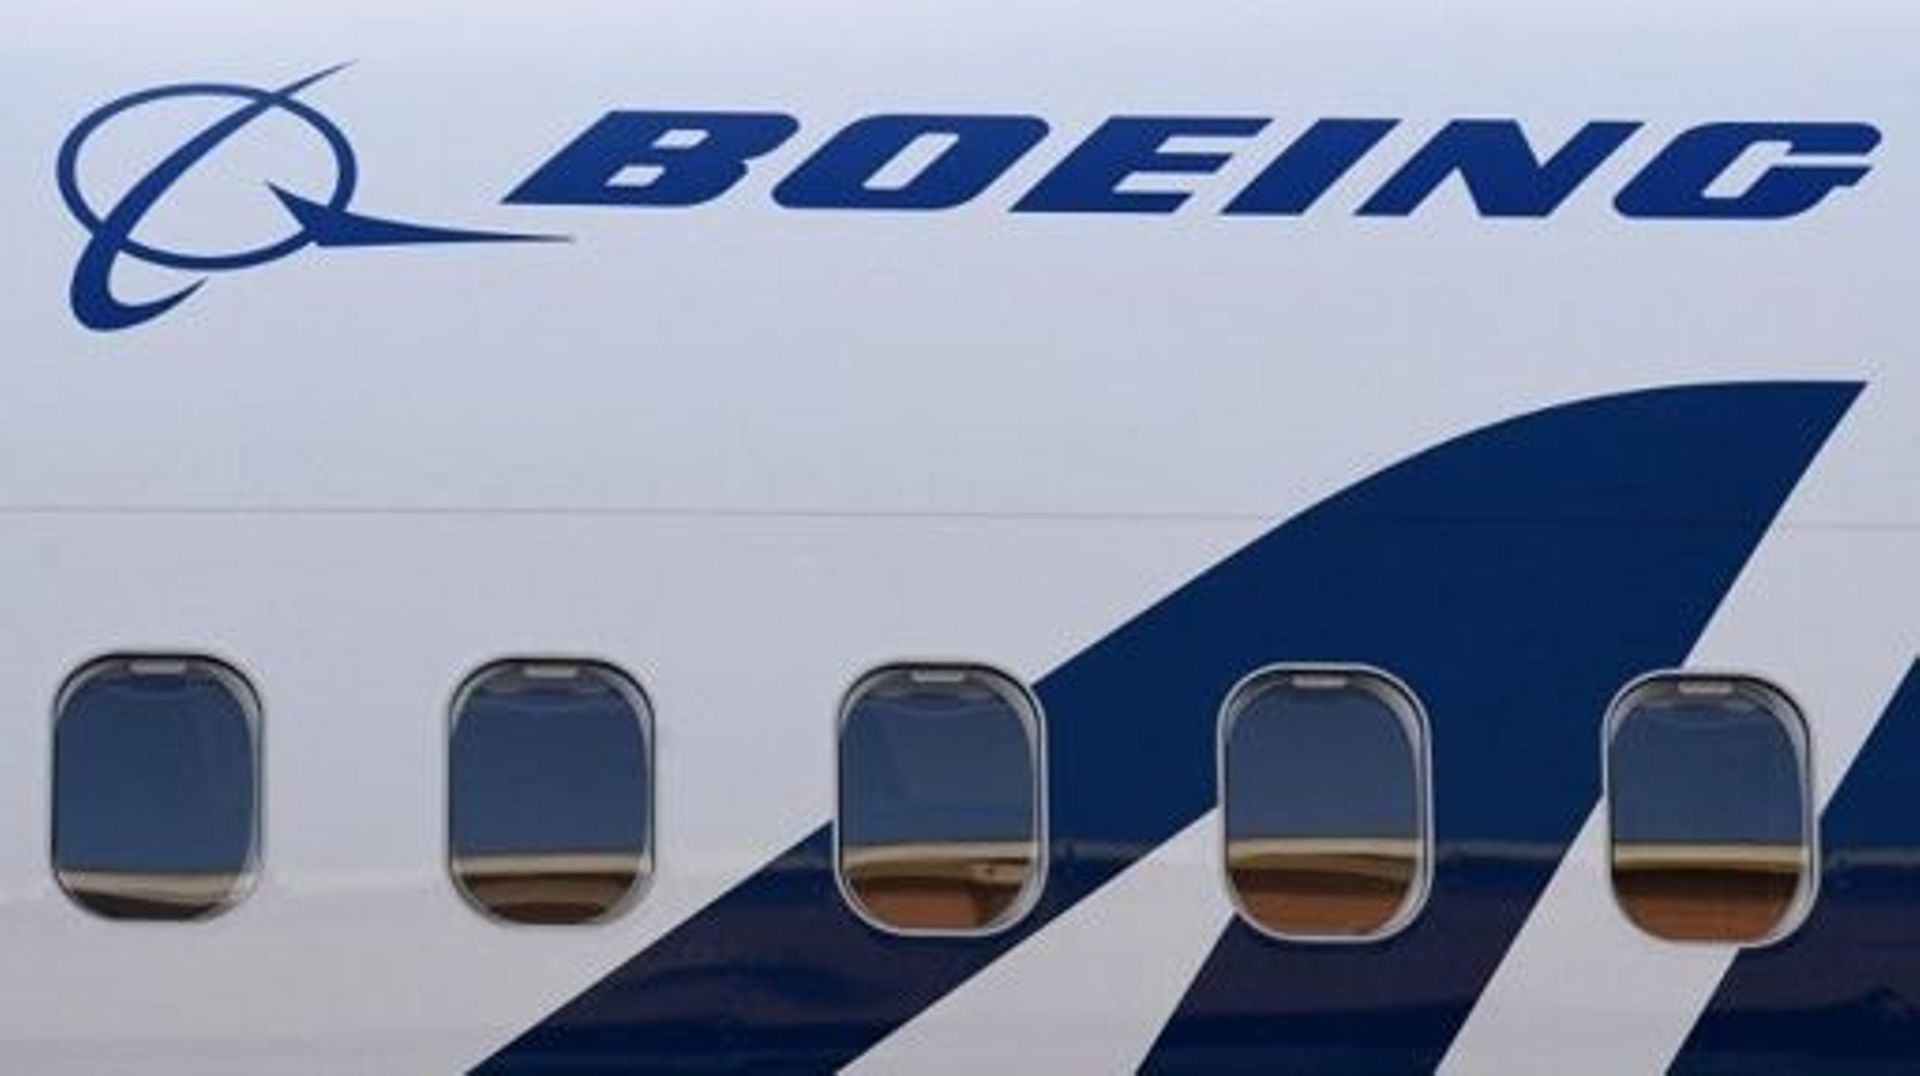 A Boeing 737-A is seen during a Boeing ecoDemonstrator program at Washington Reagan National Airport (DCA) in Arlington Virginia on July 28, 2021. Boeing landed its first quarterly profit since 2019 on higher defense earnings and a recovering commercial a